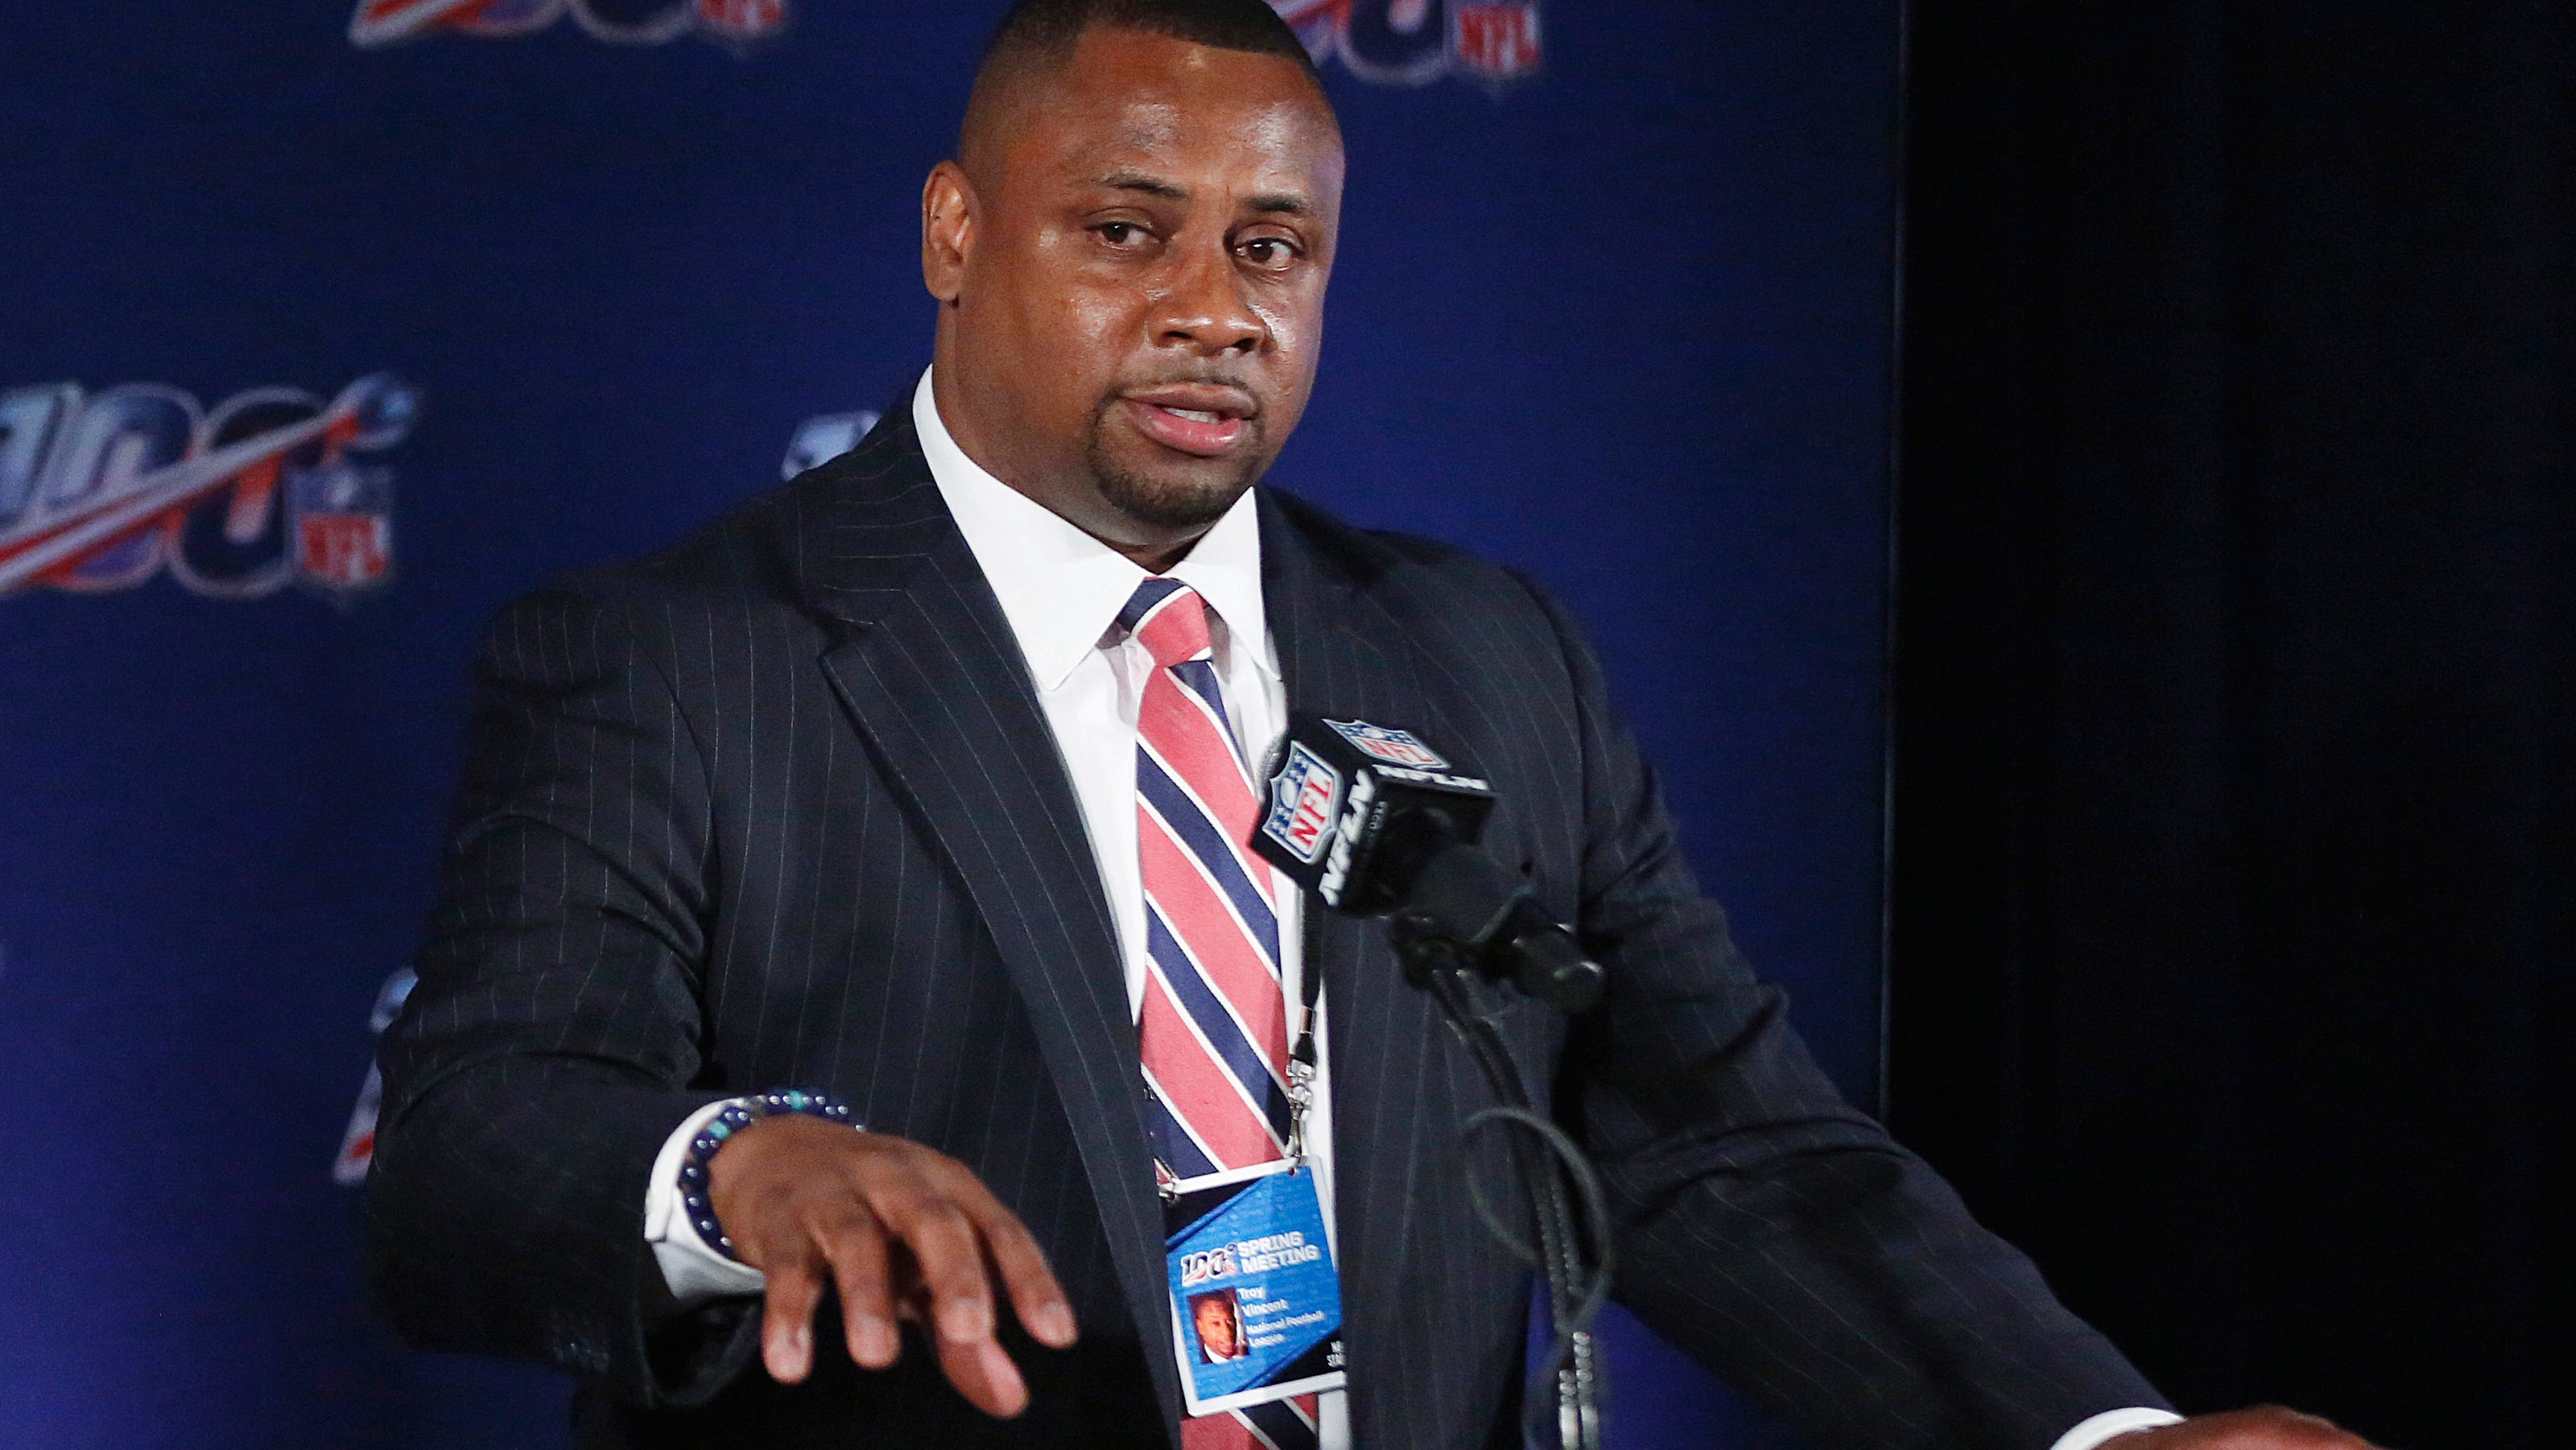 Nfl Flunks On Racial Report Card For Head Coach Front Office Hires 8504